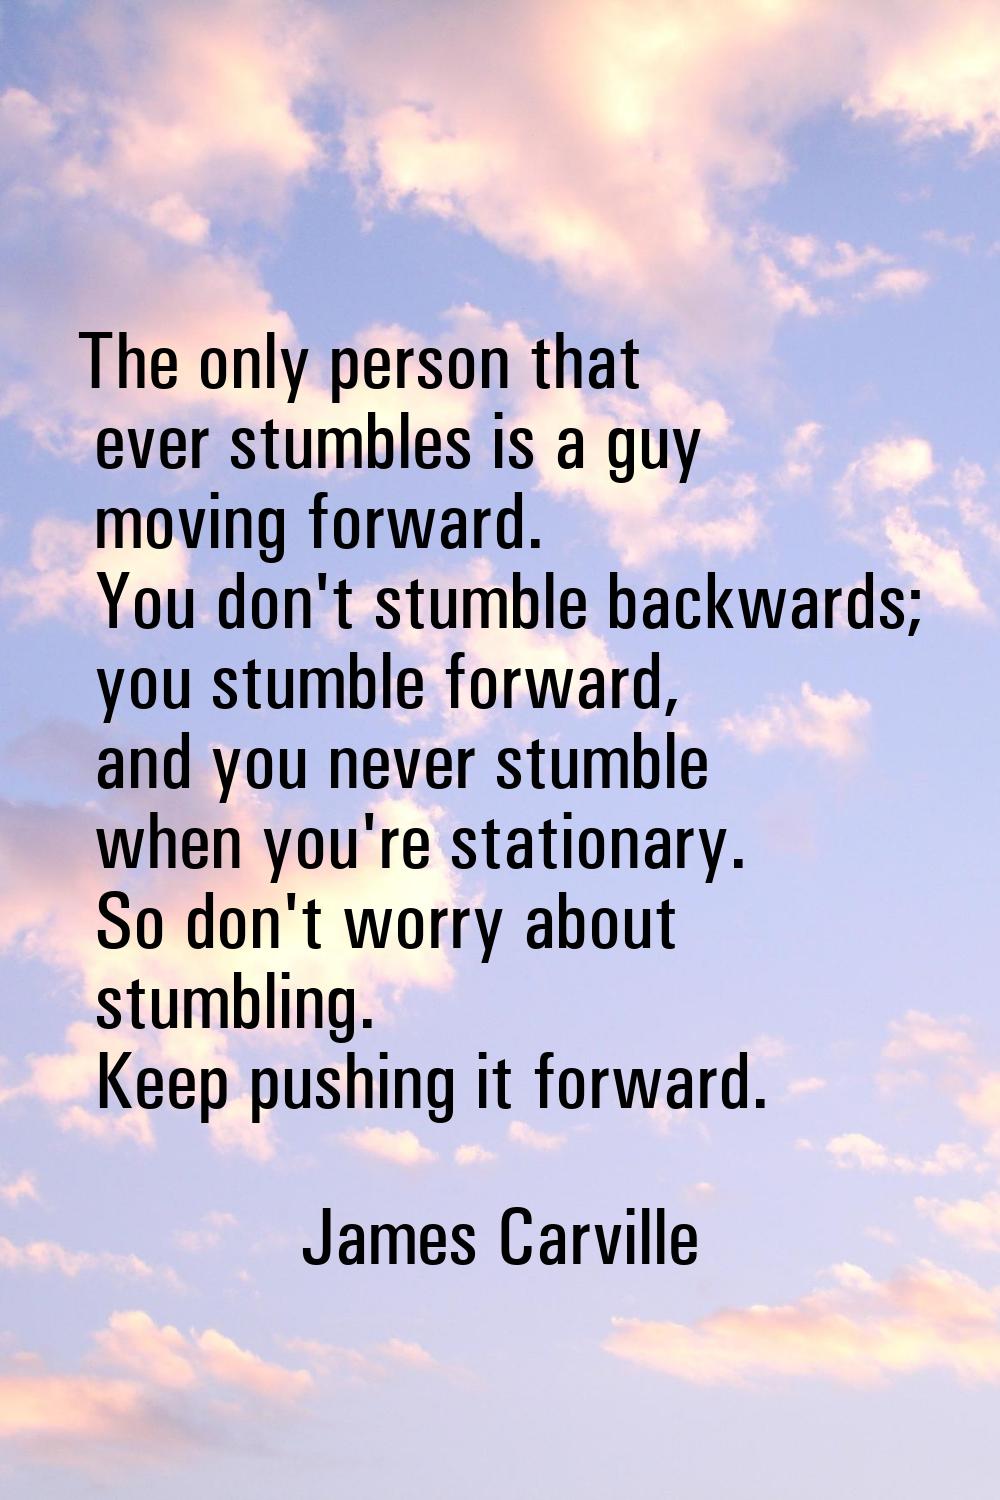 The only person that ever stumbles is a guy moving forward. You don't stumble backwards; you stumbl